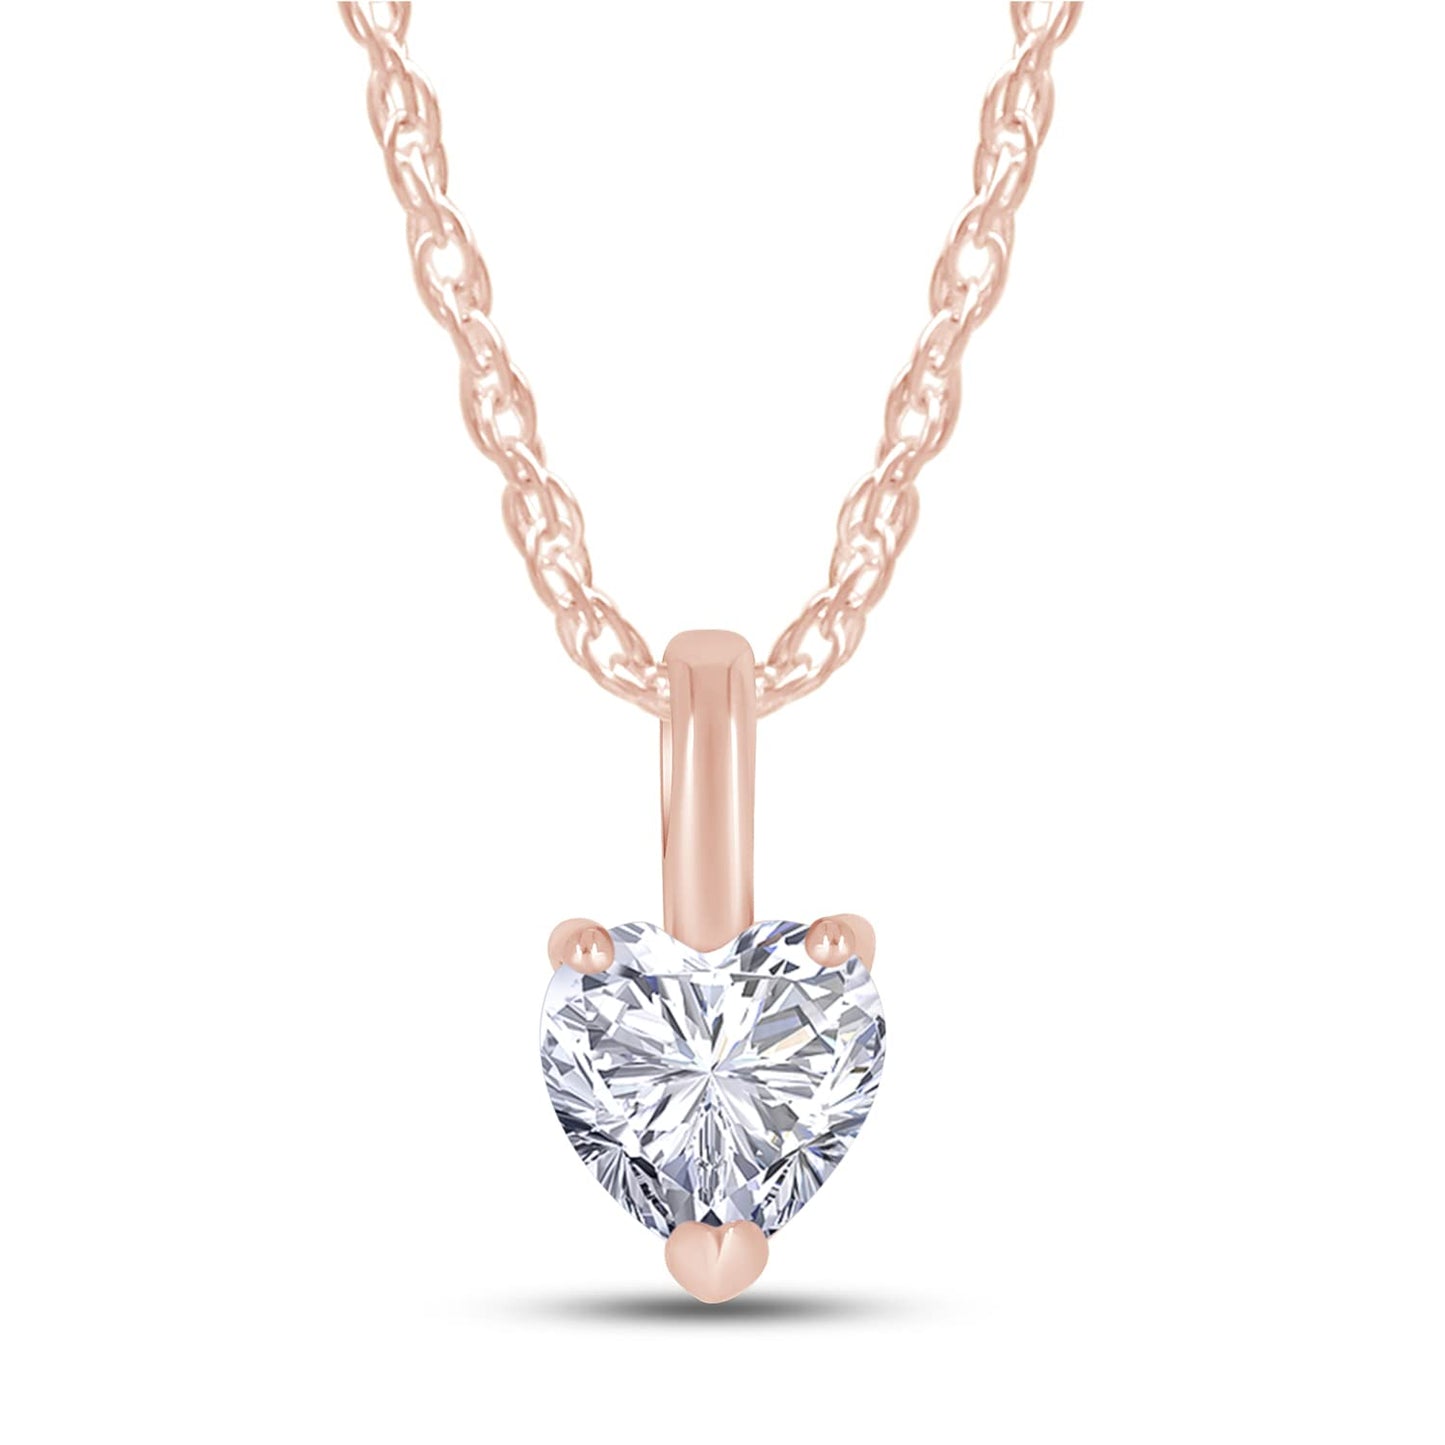 Load image into Gallery viewer, 1/2 Carat Heart Cut Lab Created Moissanite Diamond Solitaire Pendant Necklace In 925 Sterling Silver (0.50 Cttw)
